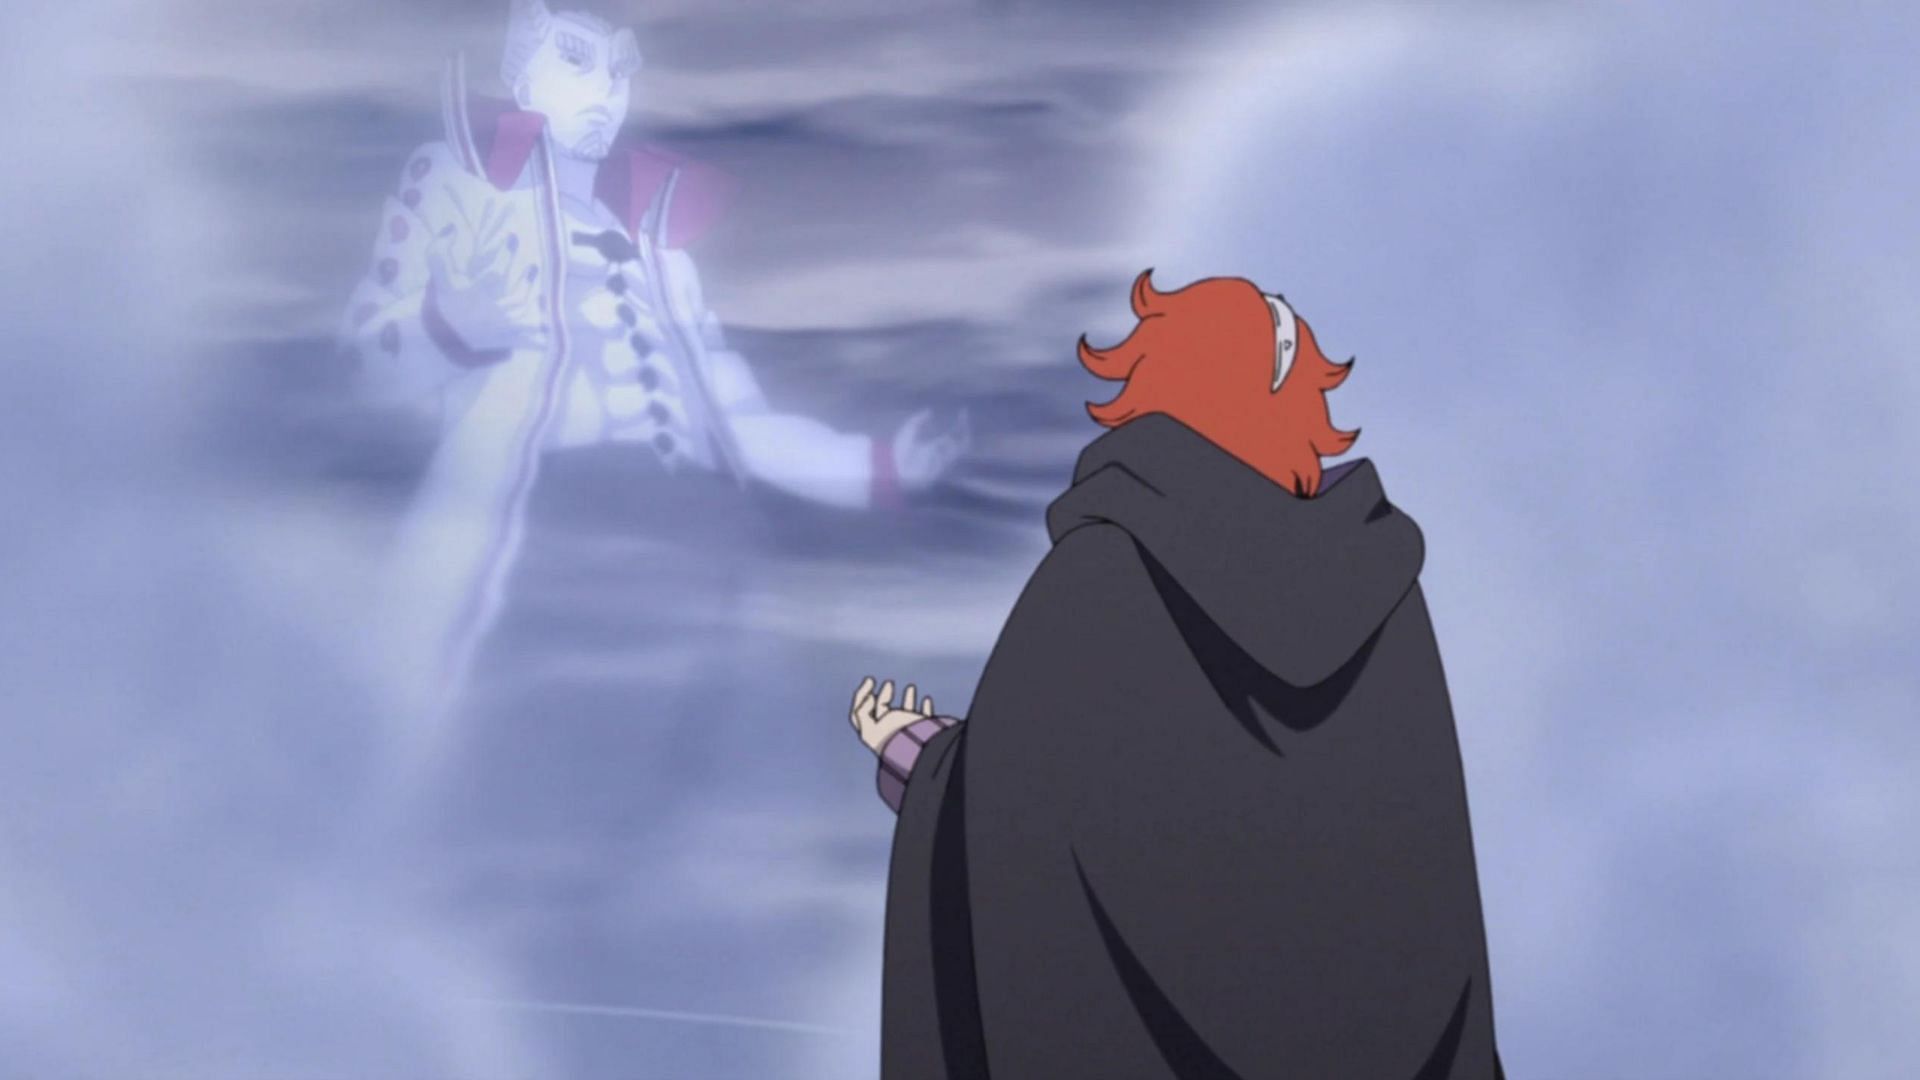 Isshiki's astral projection speaking to Code (Image via Studio Pierrot)